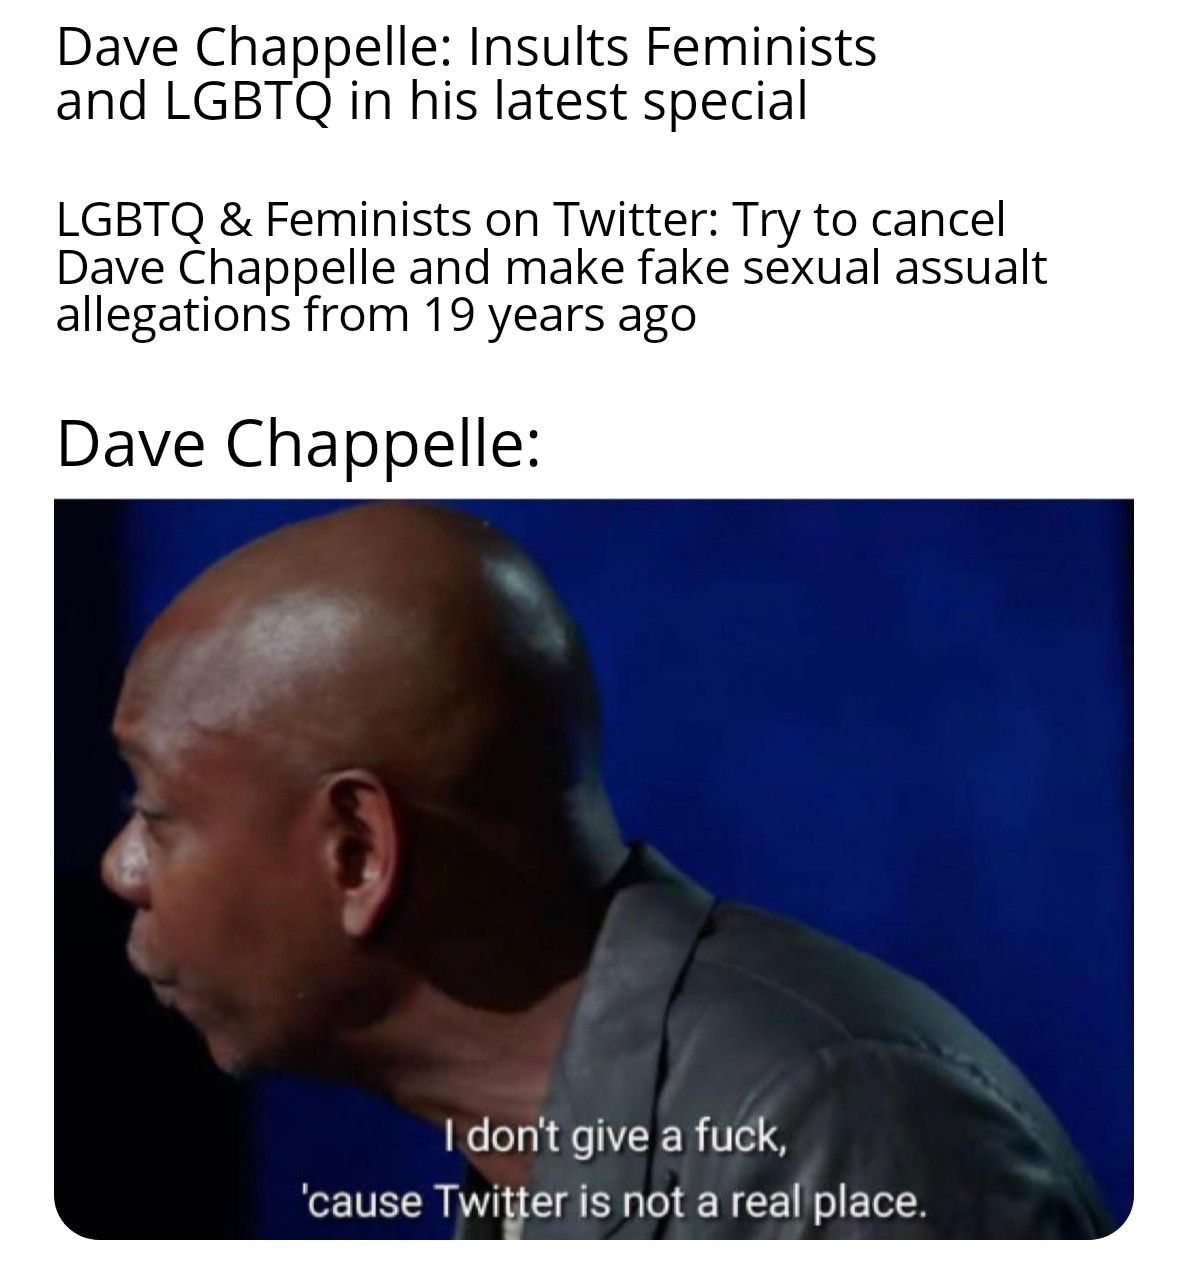 Dave Chappelle = Giga Chad